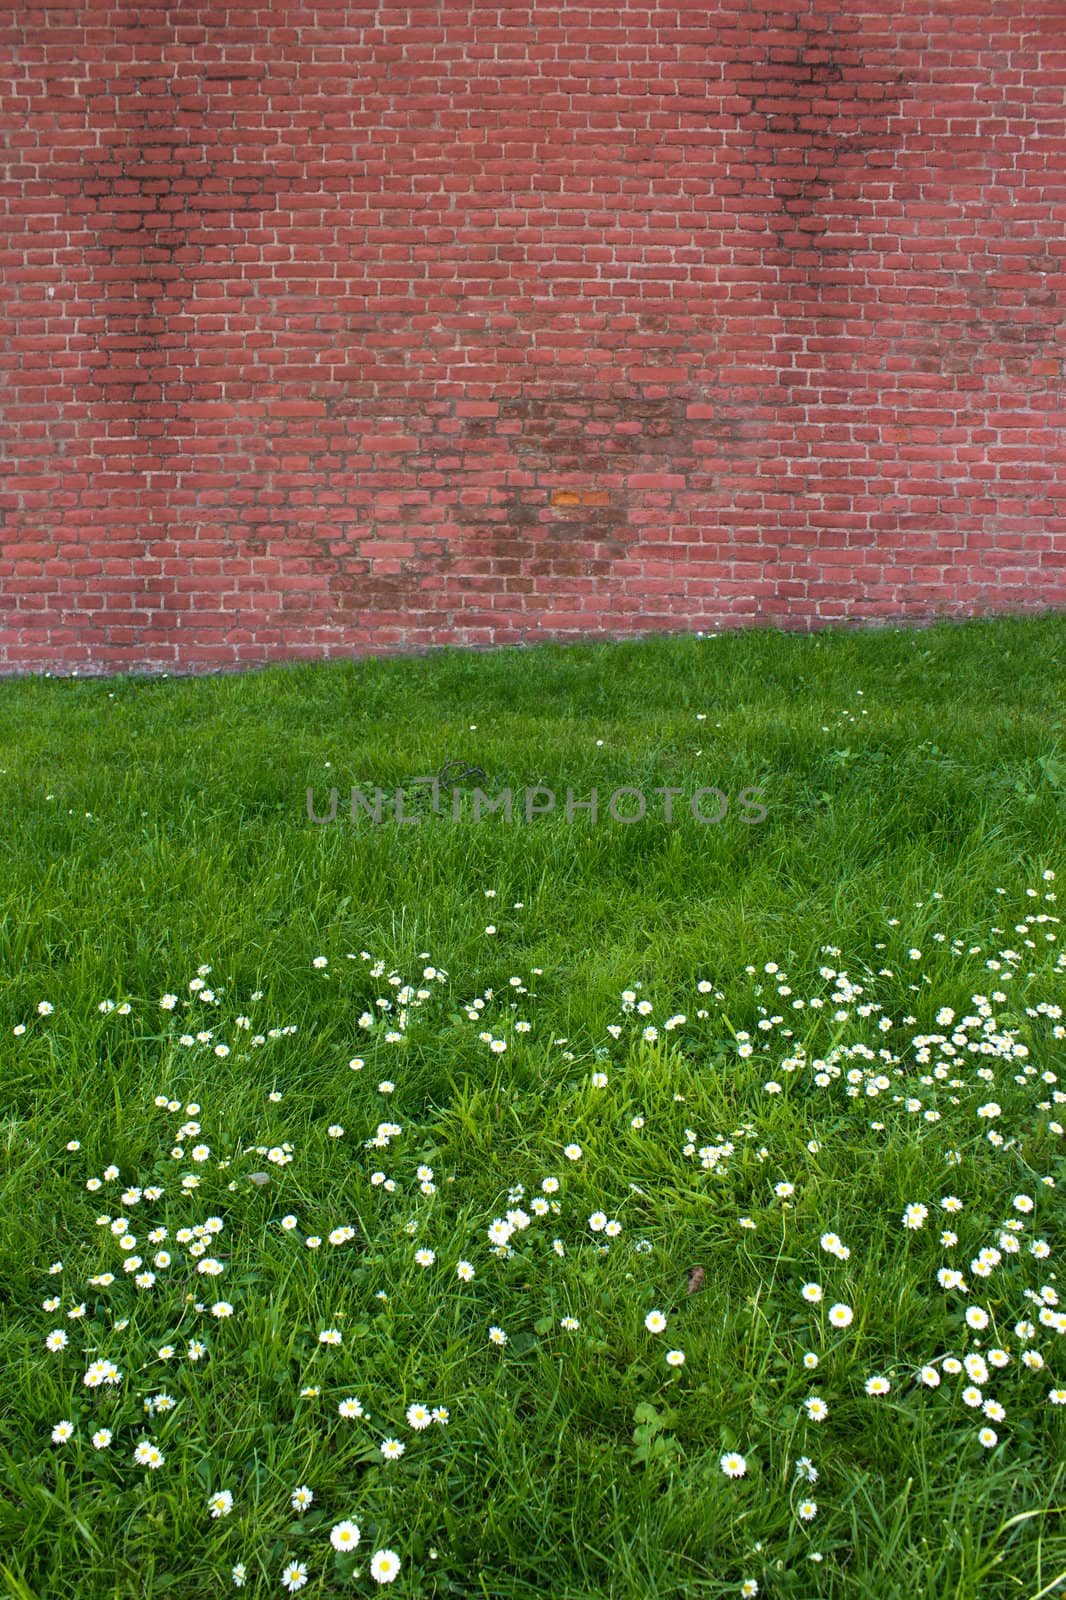 Red brick wall contrasting over green flower field